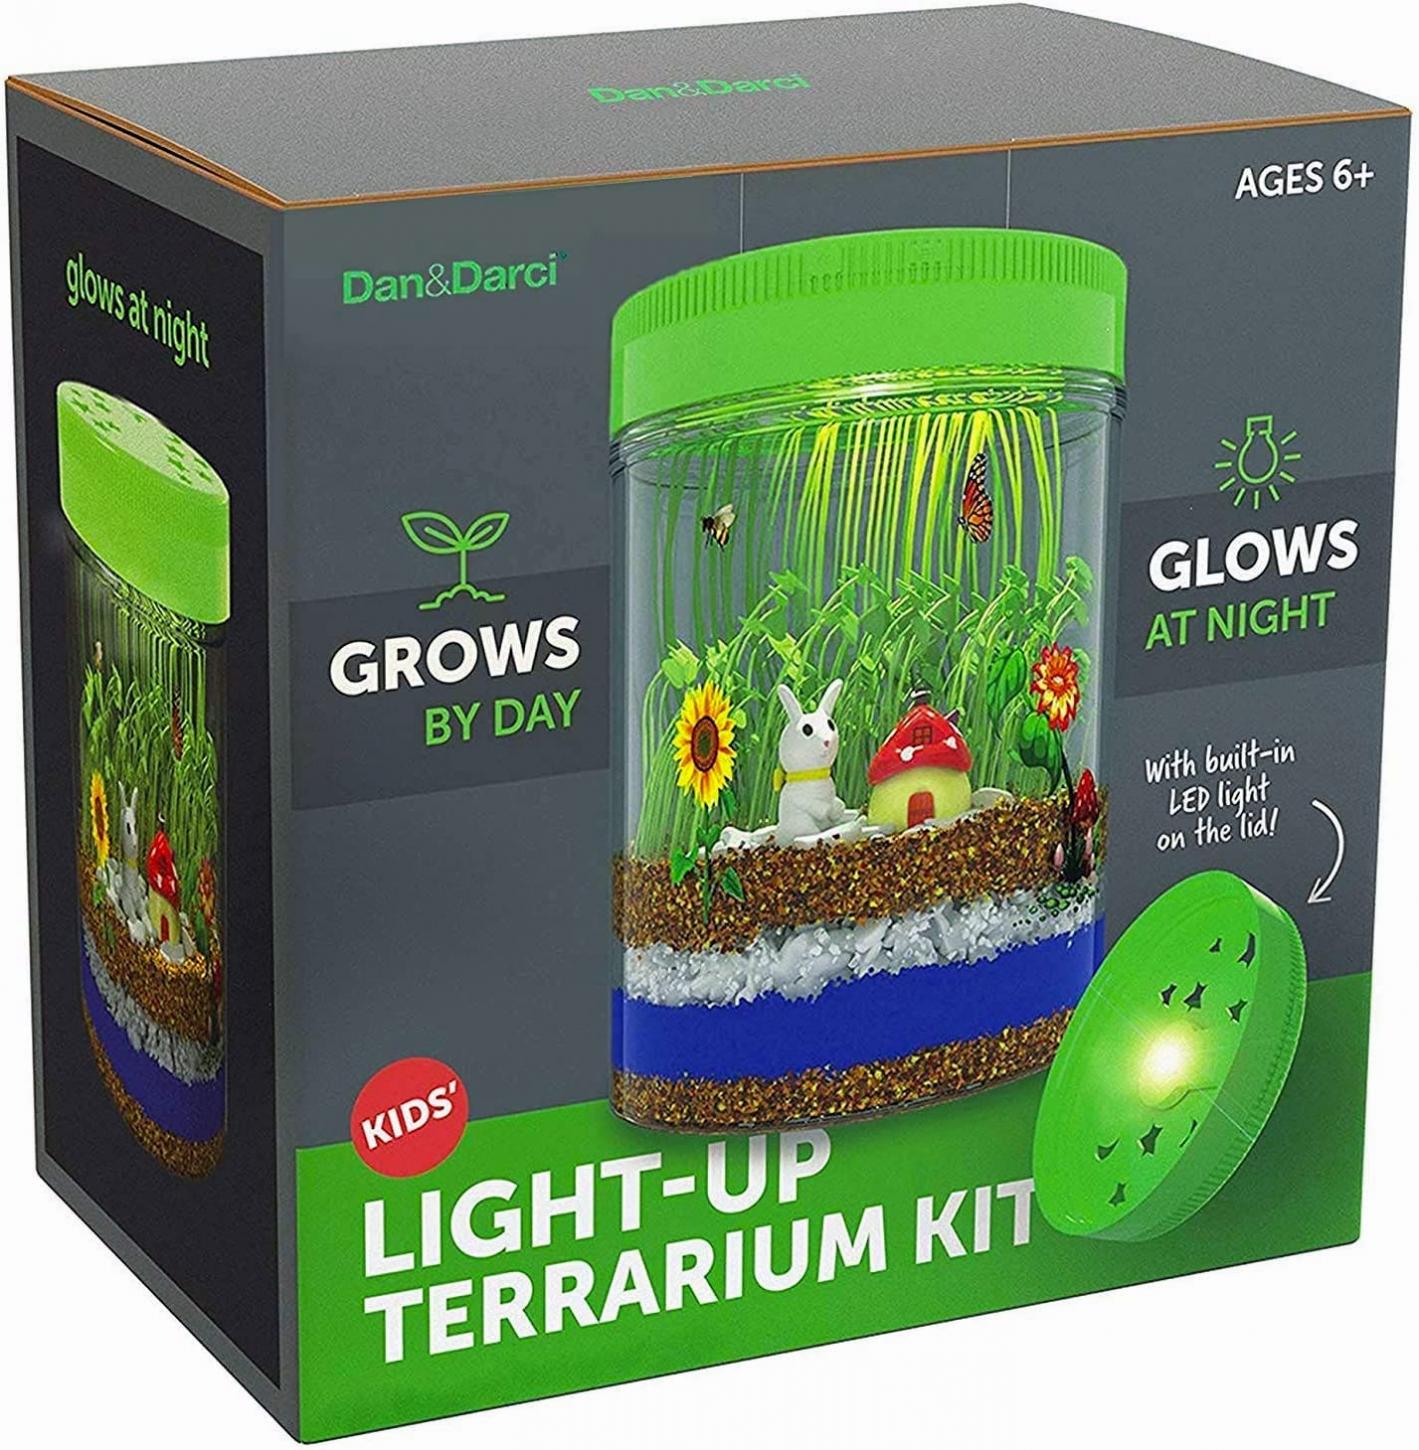 Light-Up Terrarium Kit for Kids - STEM Activities Science Kits - Gifts for Kids - Educational Kids Christmas Toys for Boys & Girls - Crafts Projects Gift for Ages 4 5 6 7 8-12 Year Old Boy & Girl